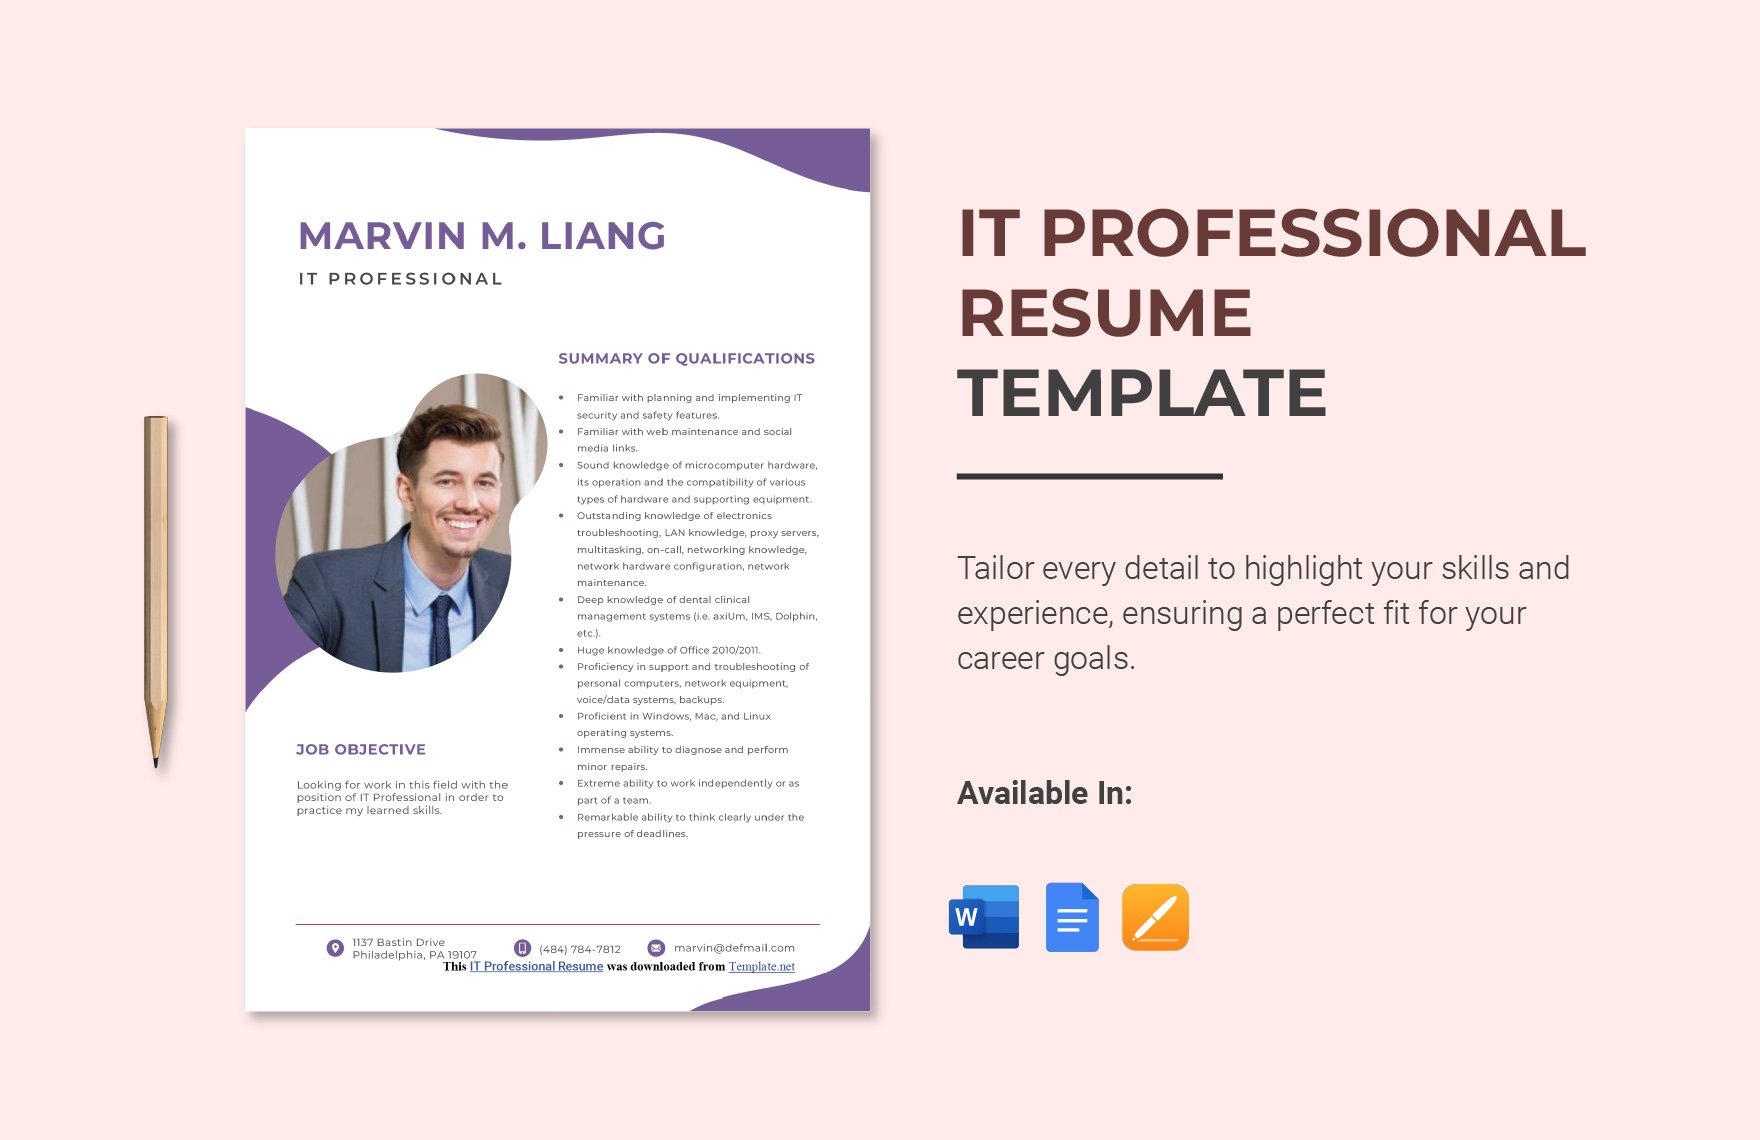 IT Professional Resume in Word, Google Docs, Apple Pages